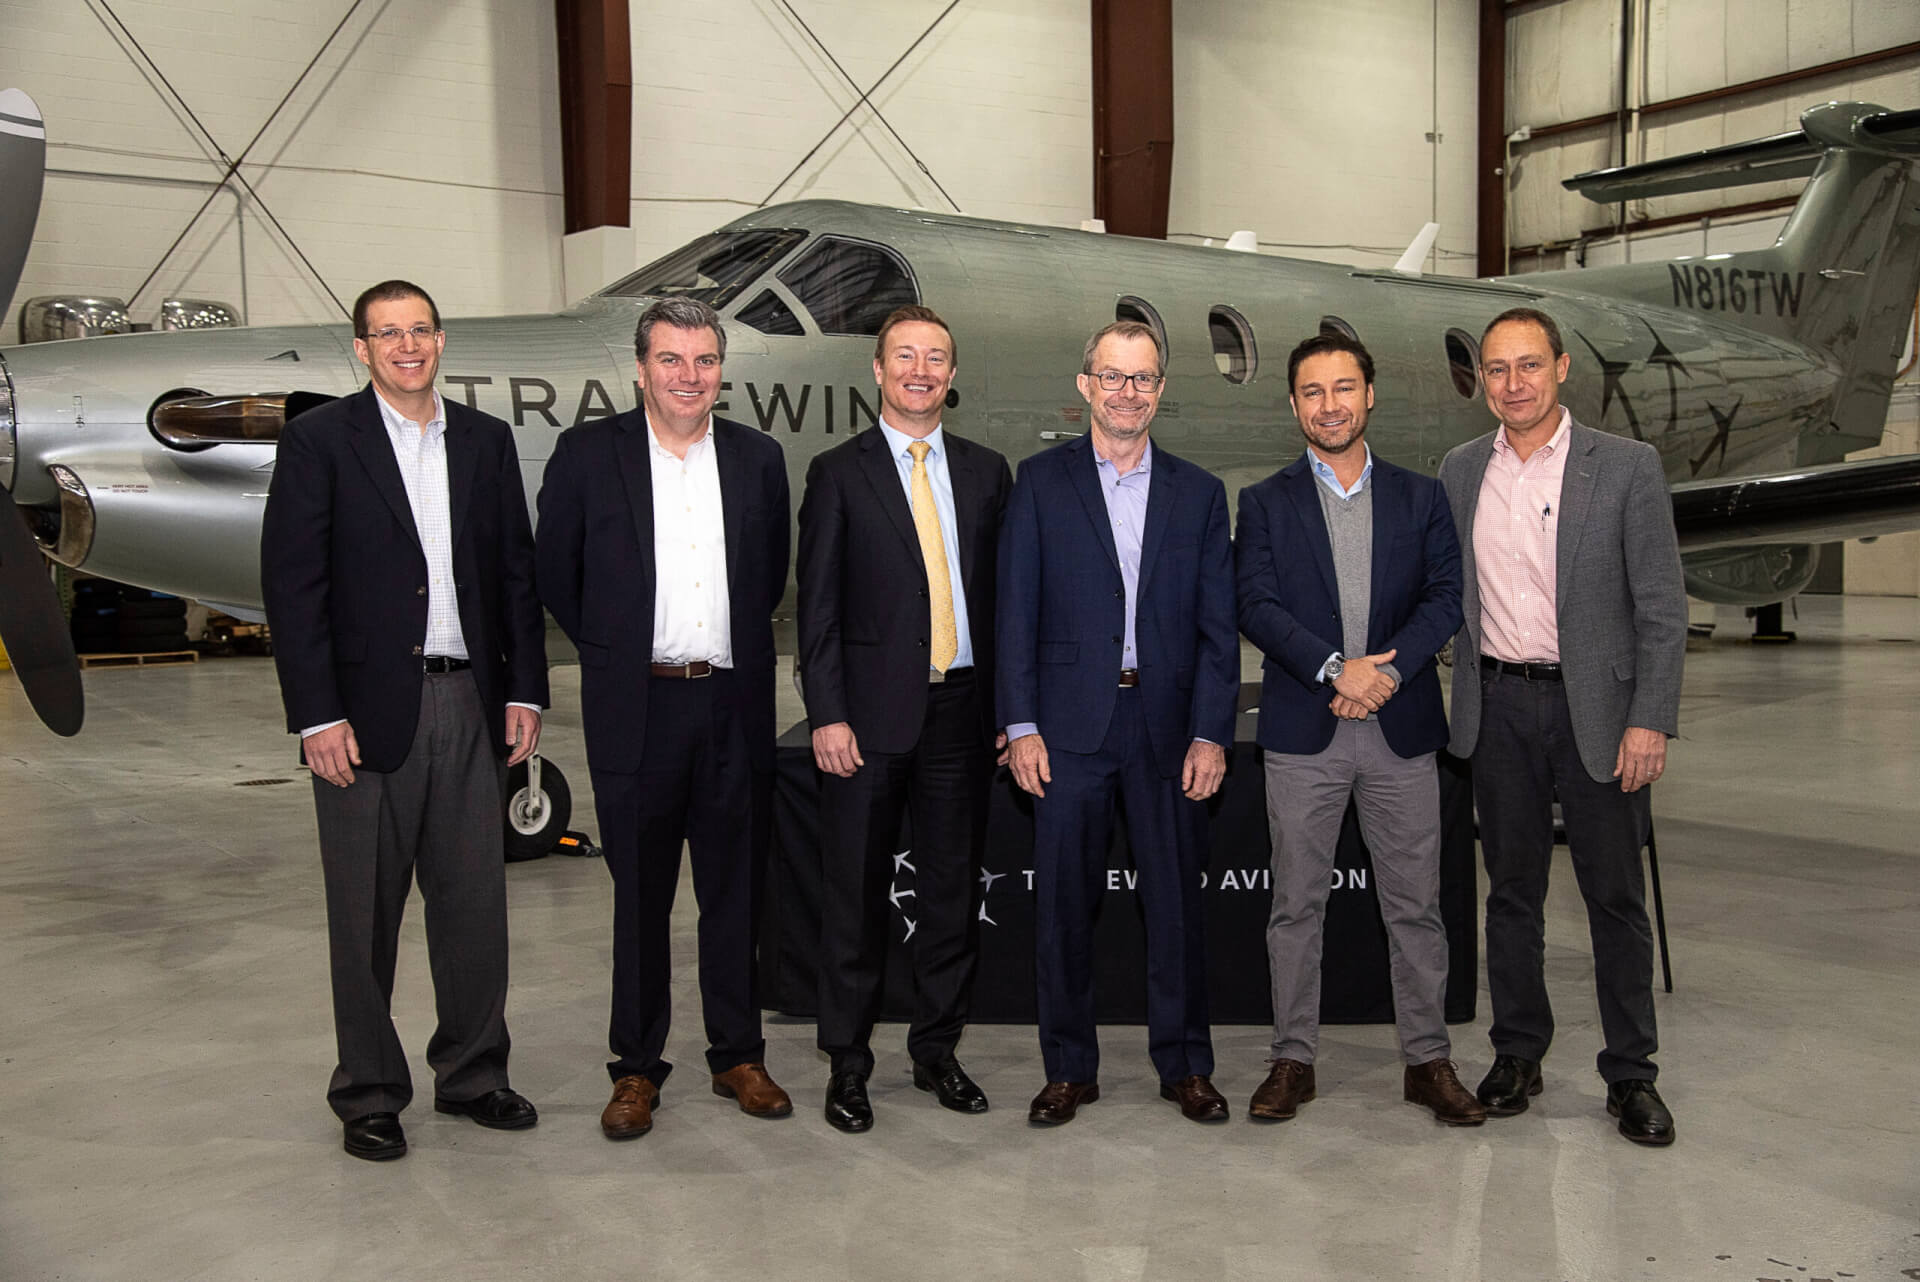 Tradewind Aviation Expands with 20 Brand-New PC-12 NGX